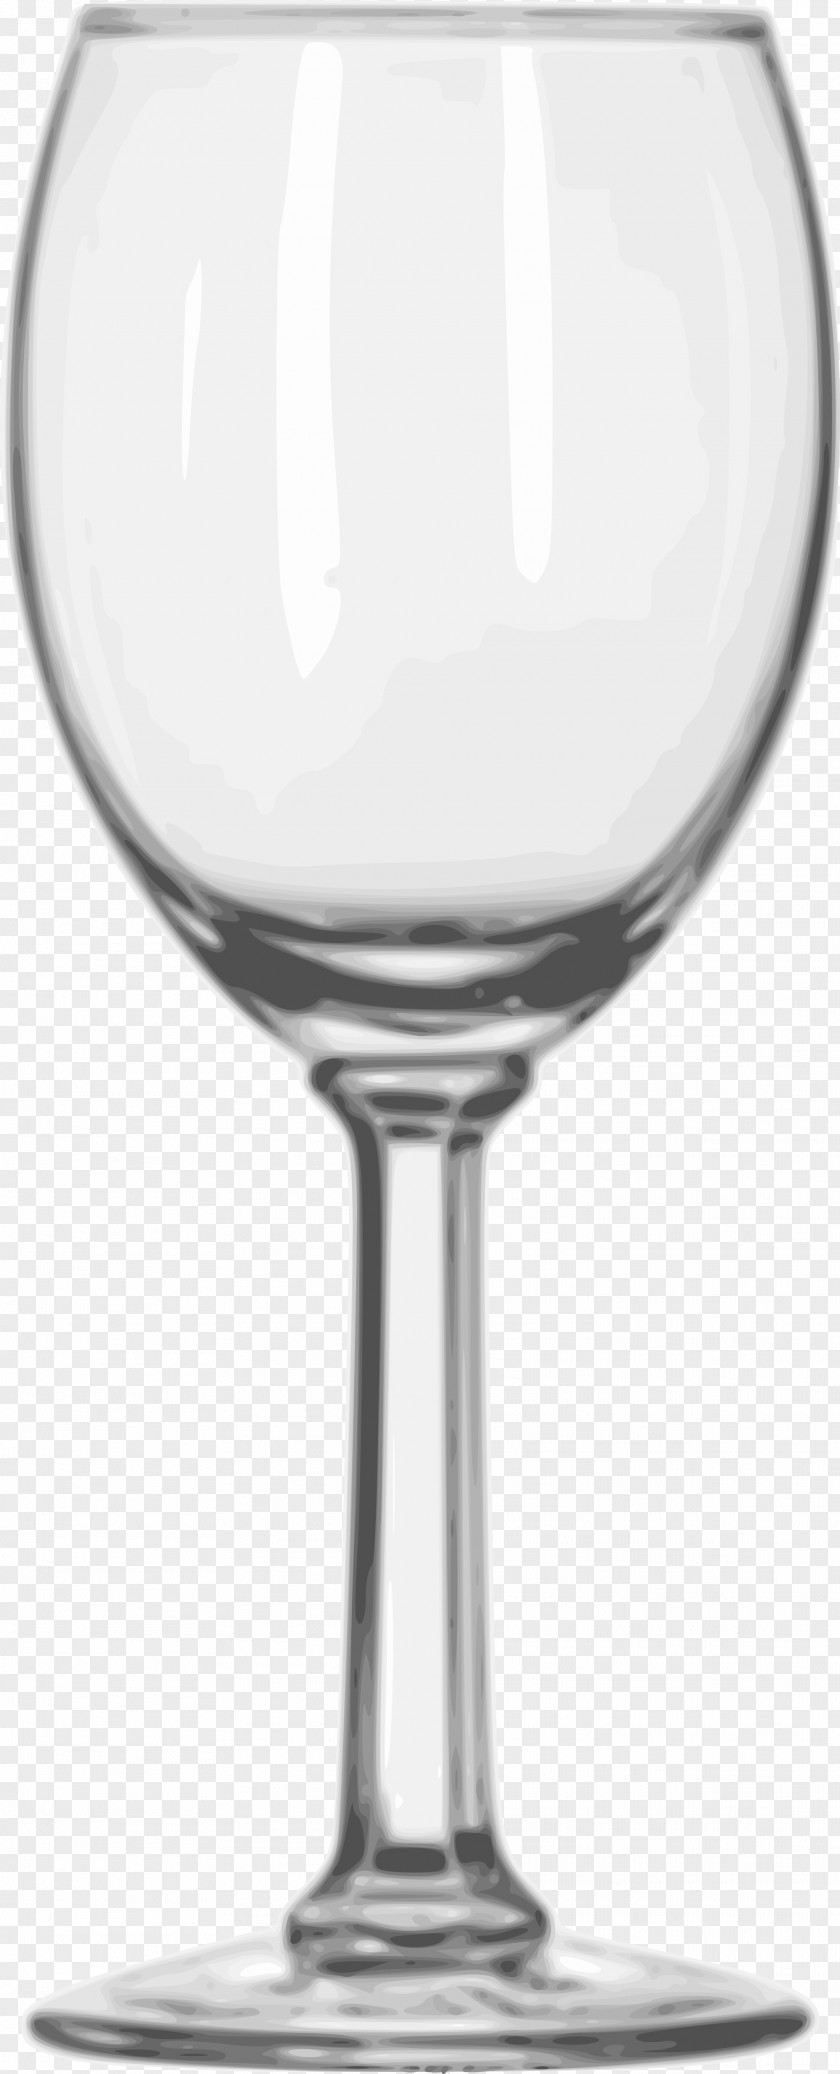 Wineglass Wine Glass Cocktail White PNG